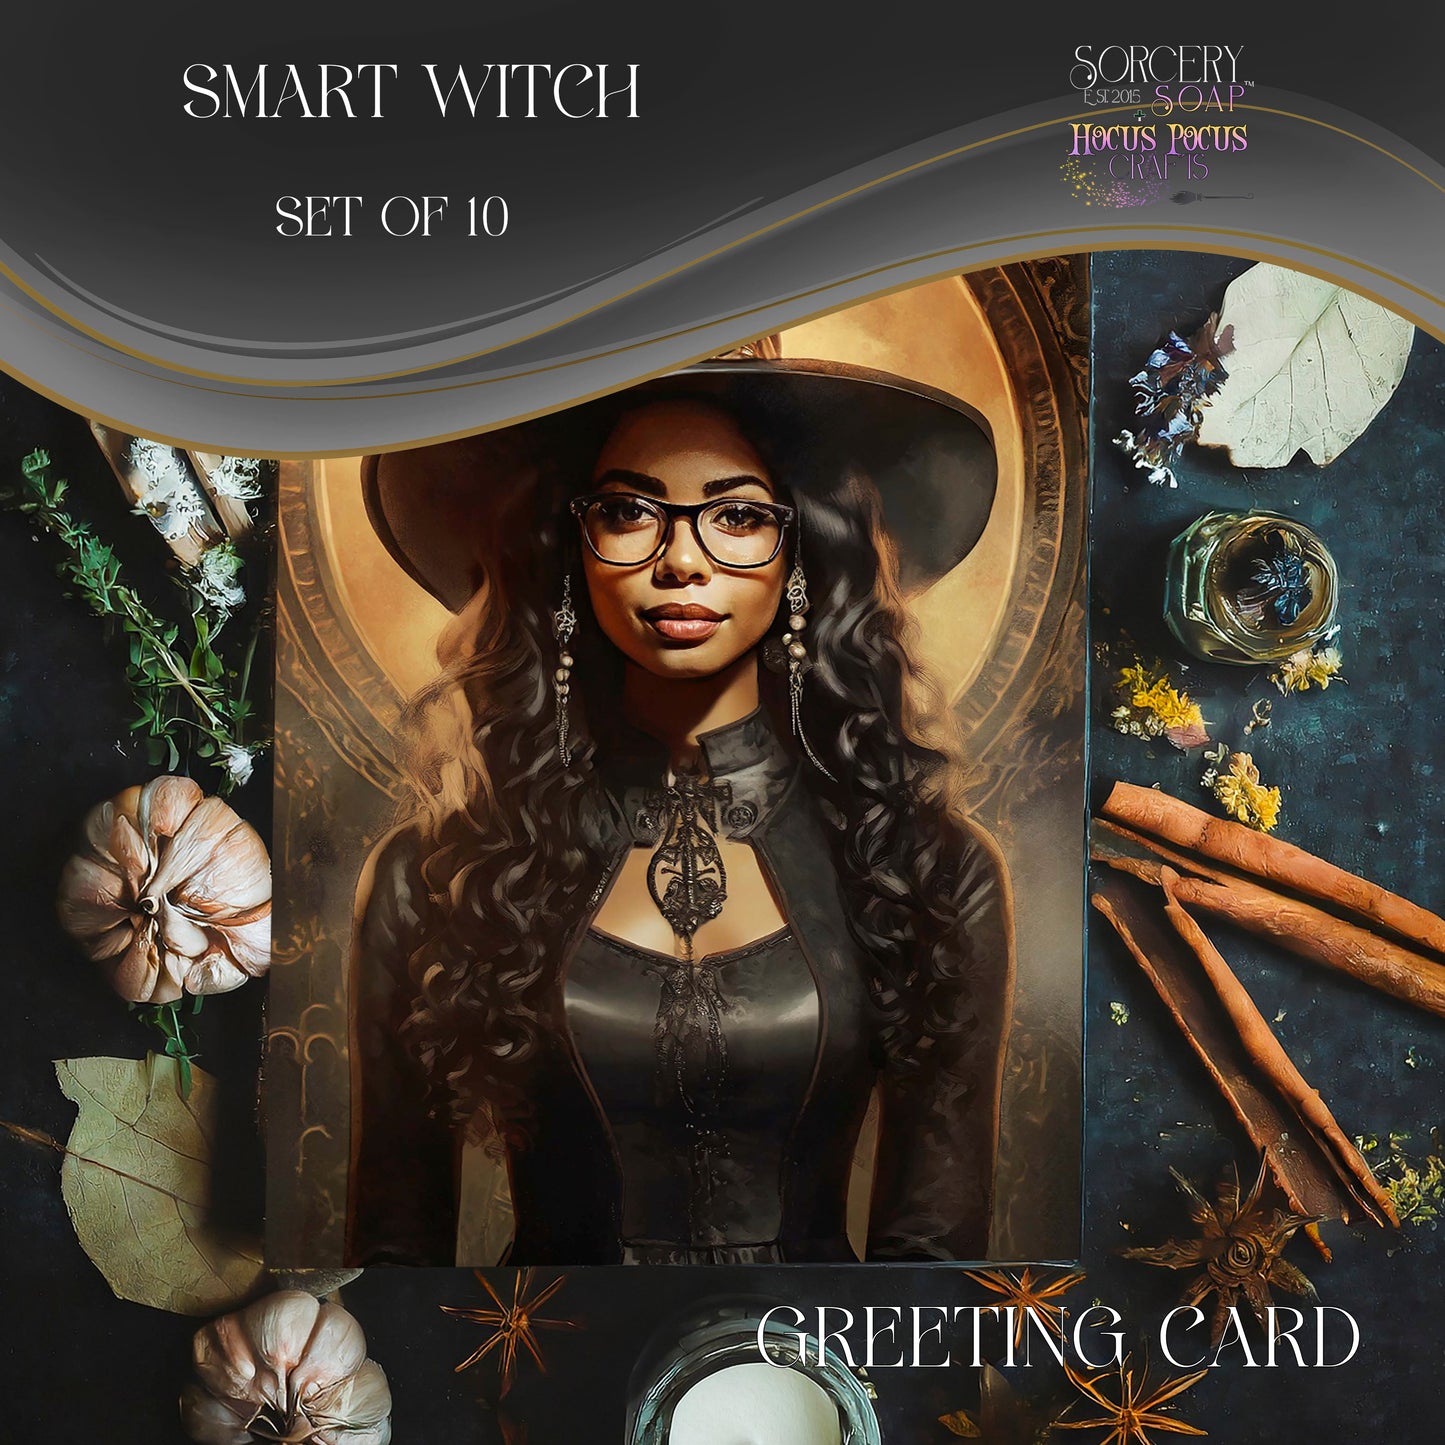 Smart Witch Greeting Card